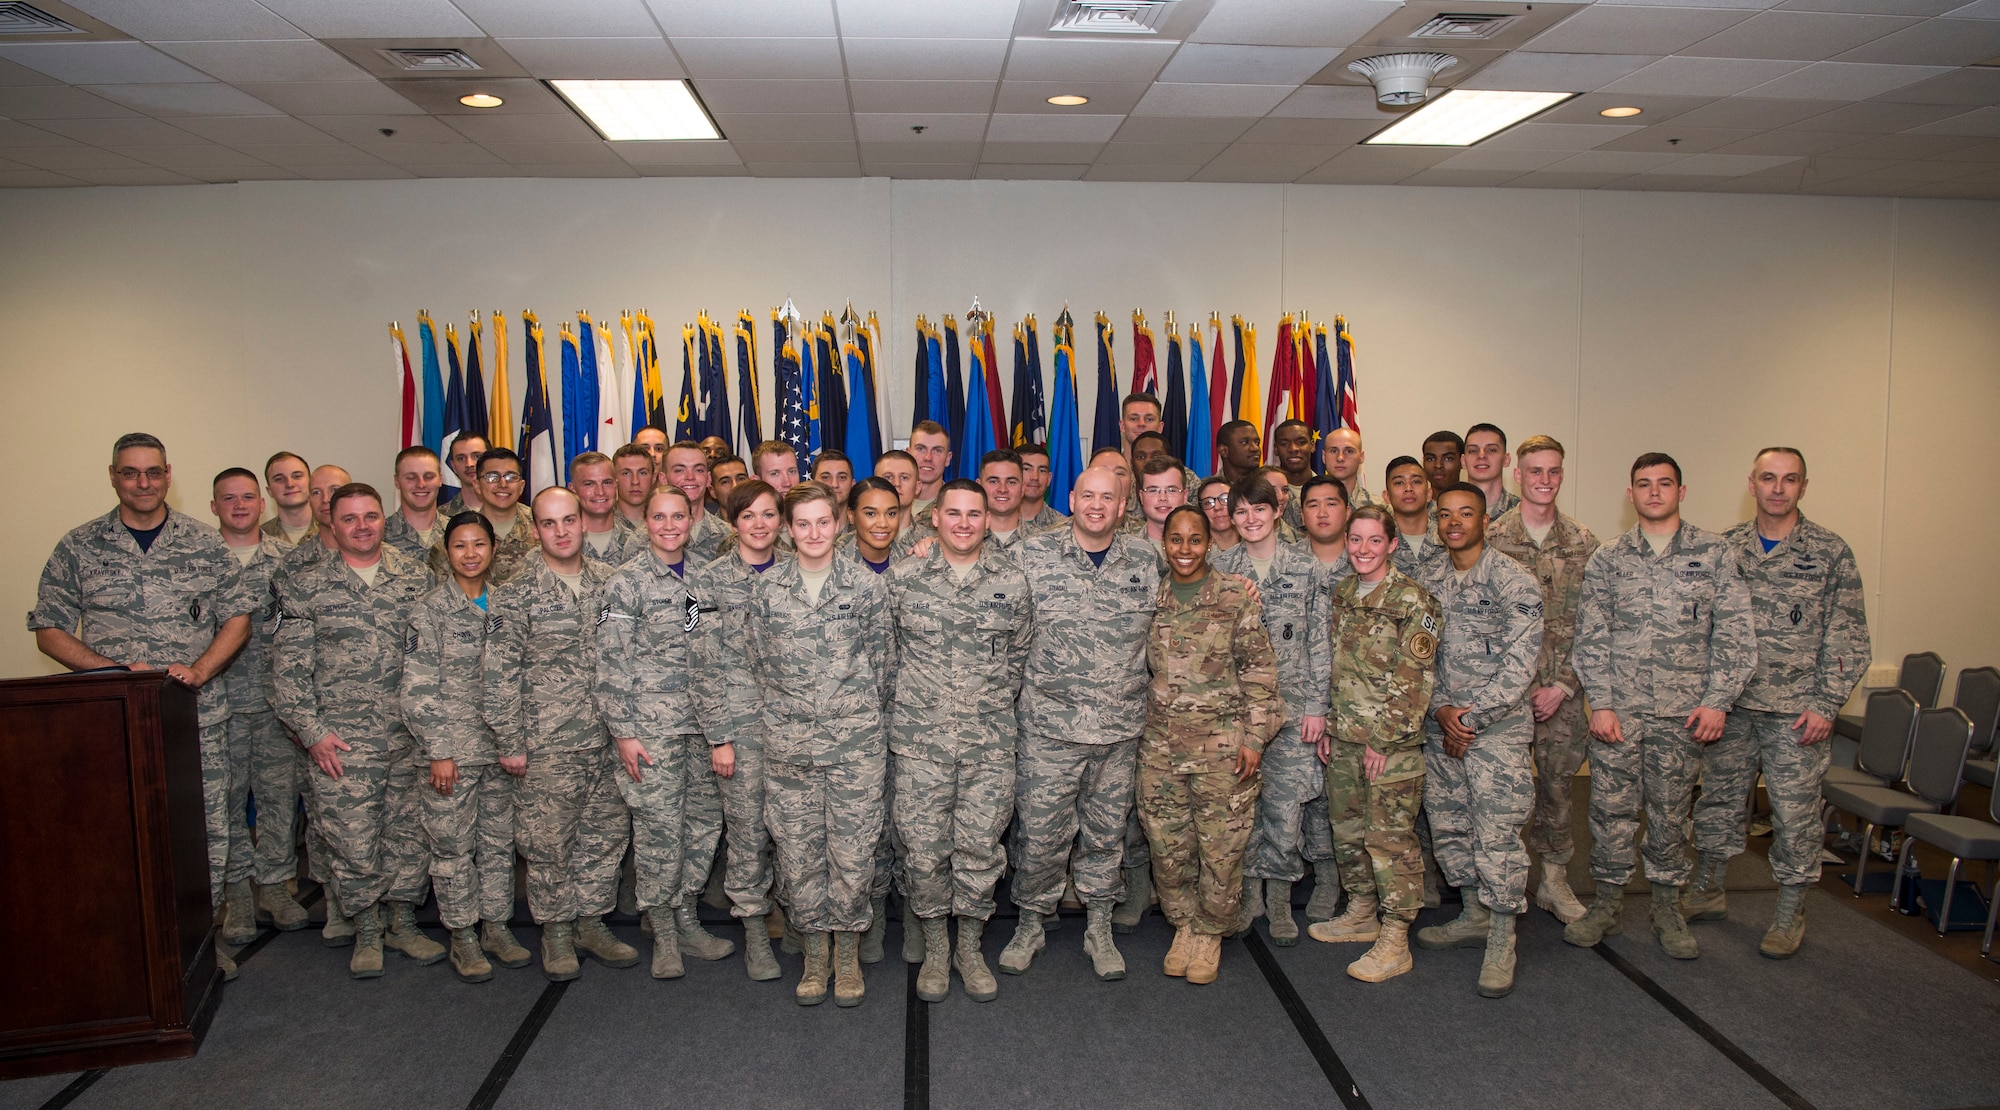 Col. Stephen Kravitsky, 90th Missile Wing commander along with Col. Lloyd Buzzell, 20th Air Force vice commander and Chief Master Sgt. Jeffery Steagall, 90th MW command chief pose for a group photo with enlisted Airmen who promoted in March and April during the wing promotion ceremony on F.E. Warren Air Force Base, Wyo., April 28, 2017. Each month the Mighty Ninety hosts a ceremony to recognize the promotees from the base. (U.S. Air Force photo by Staff Sgt. Christopher Ruano)